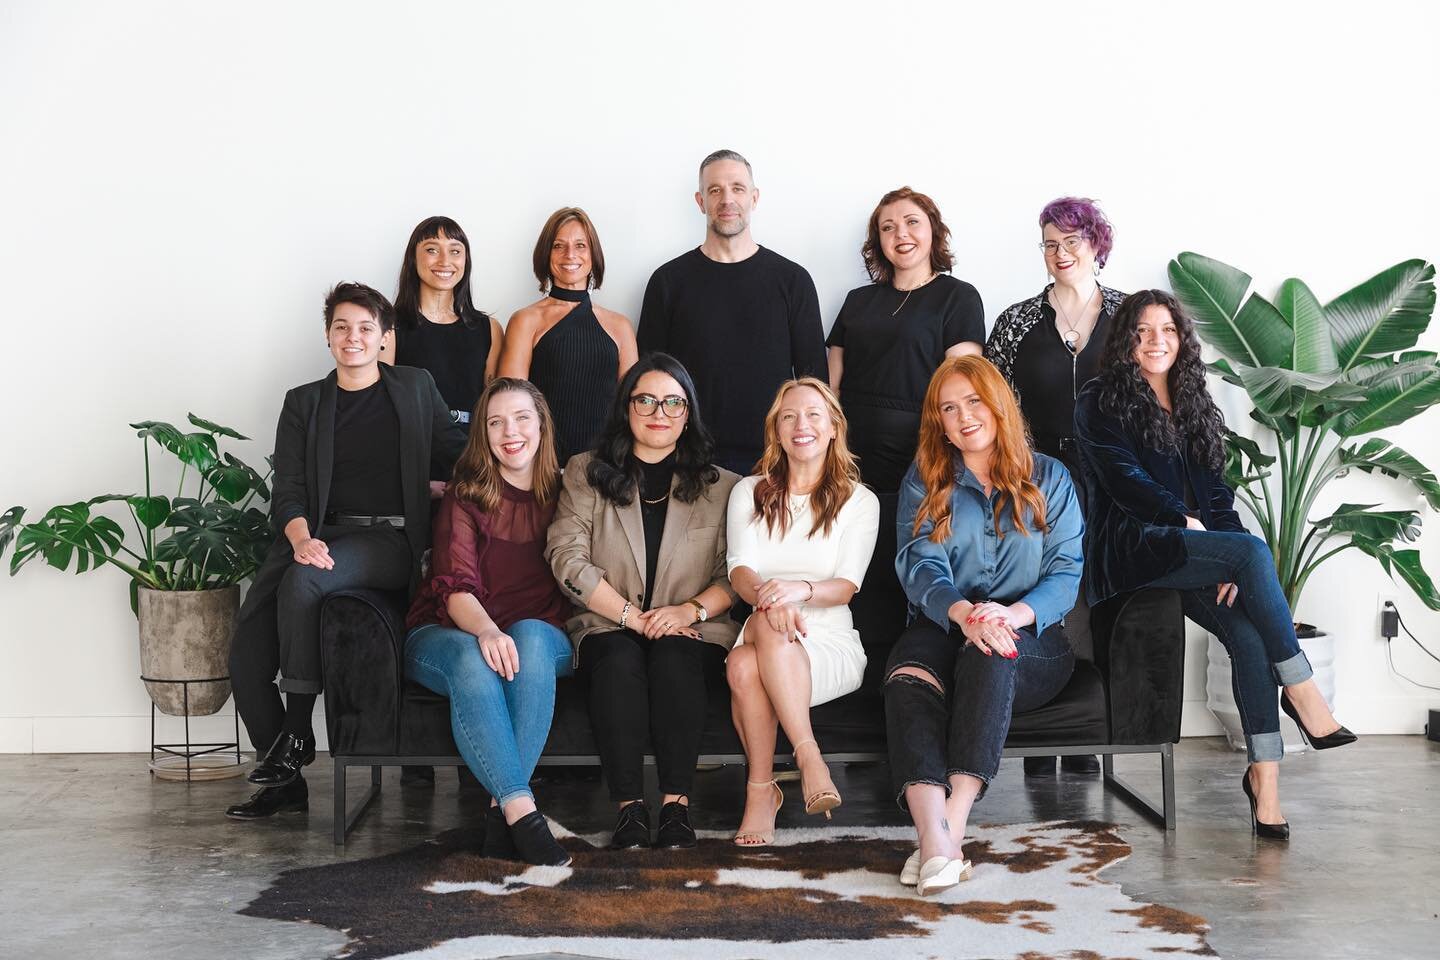 We are a collective of comprehensively trained, client-centered, and value-focused therapists who have a sincere interest in helping people improve connection to themselves, their sexuality, and their relationships with others. Our values reflect who